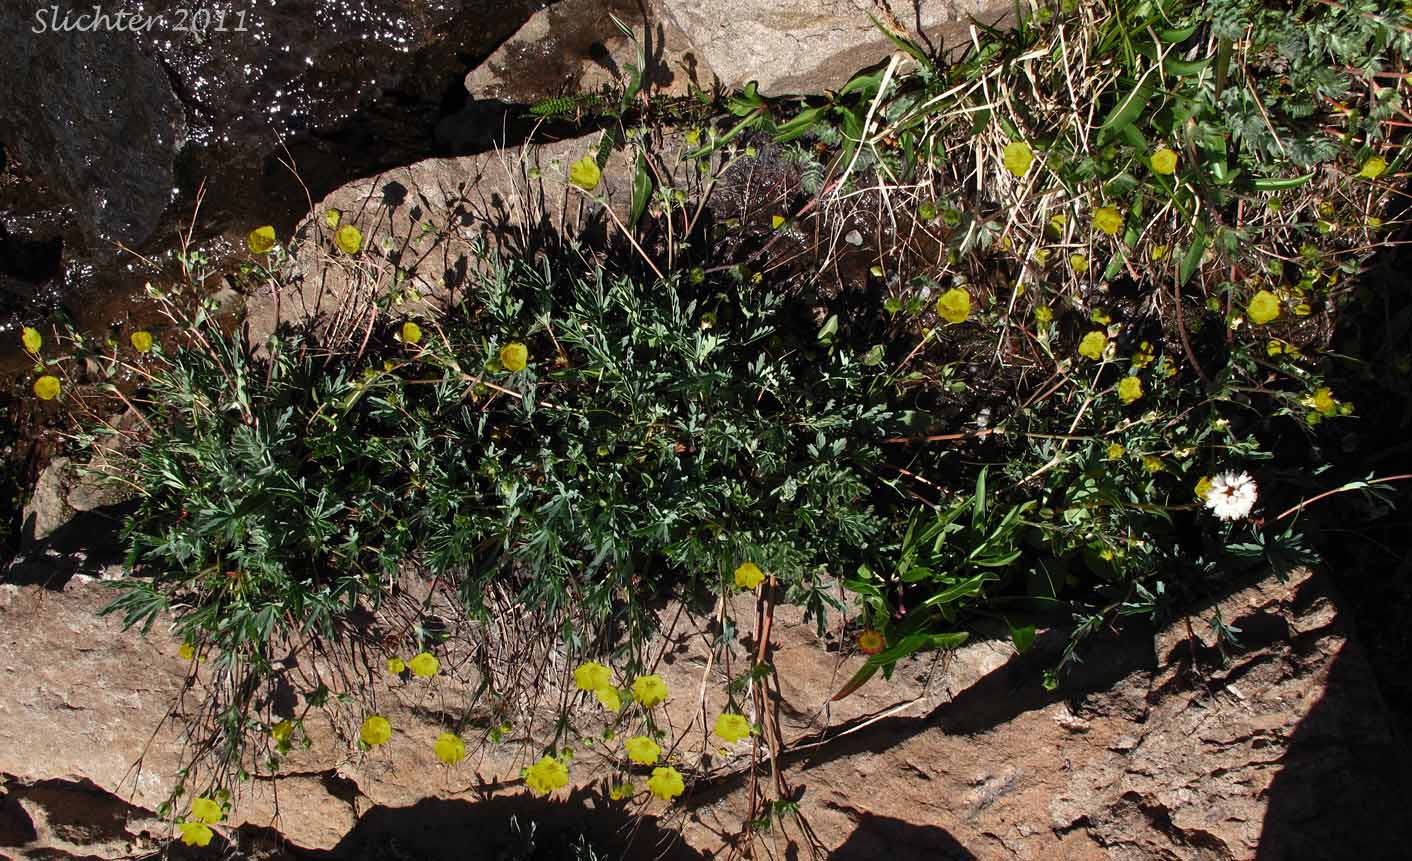 Brewer's cinquefoil (Potentilla glandulosa campanulata) and diverse-leaved cinquefoil (Potentilla glaucophylla var. glaucophylla) as seen at a seep in moist, rocky meadows along the South Loop Road about one mile downhill from the East Rim Viewpoint, Steens Mountain, Harney County, Oregon..............September 2, 2011.